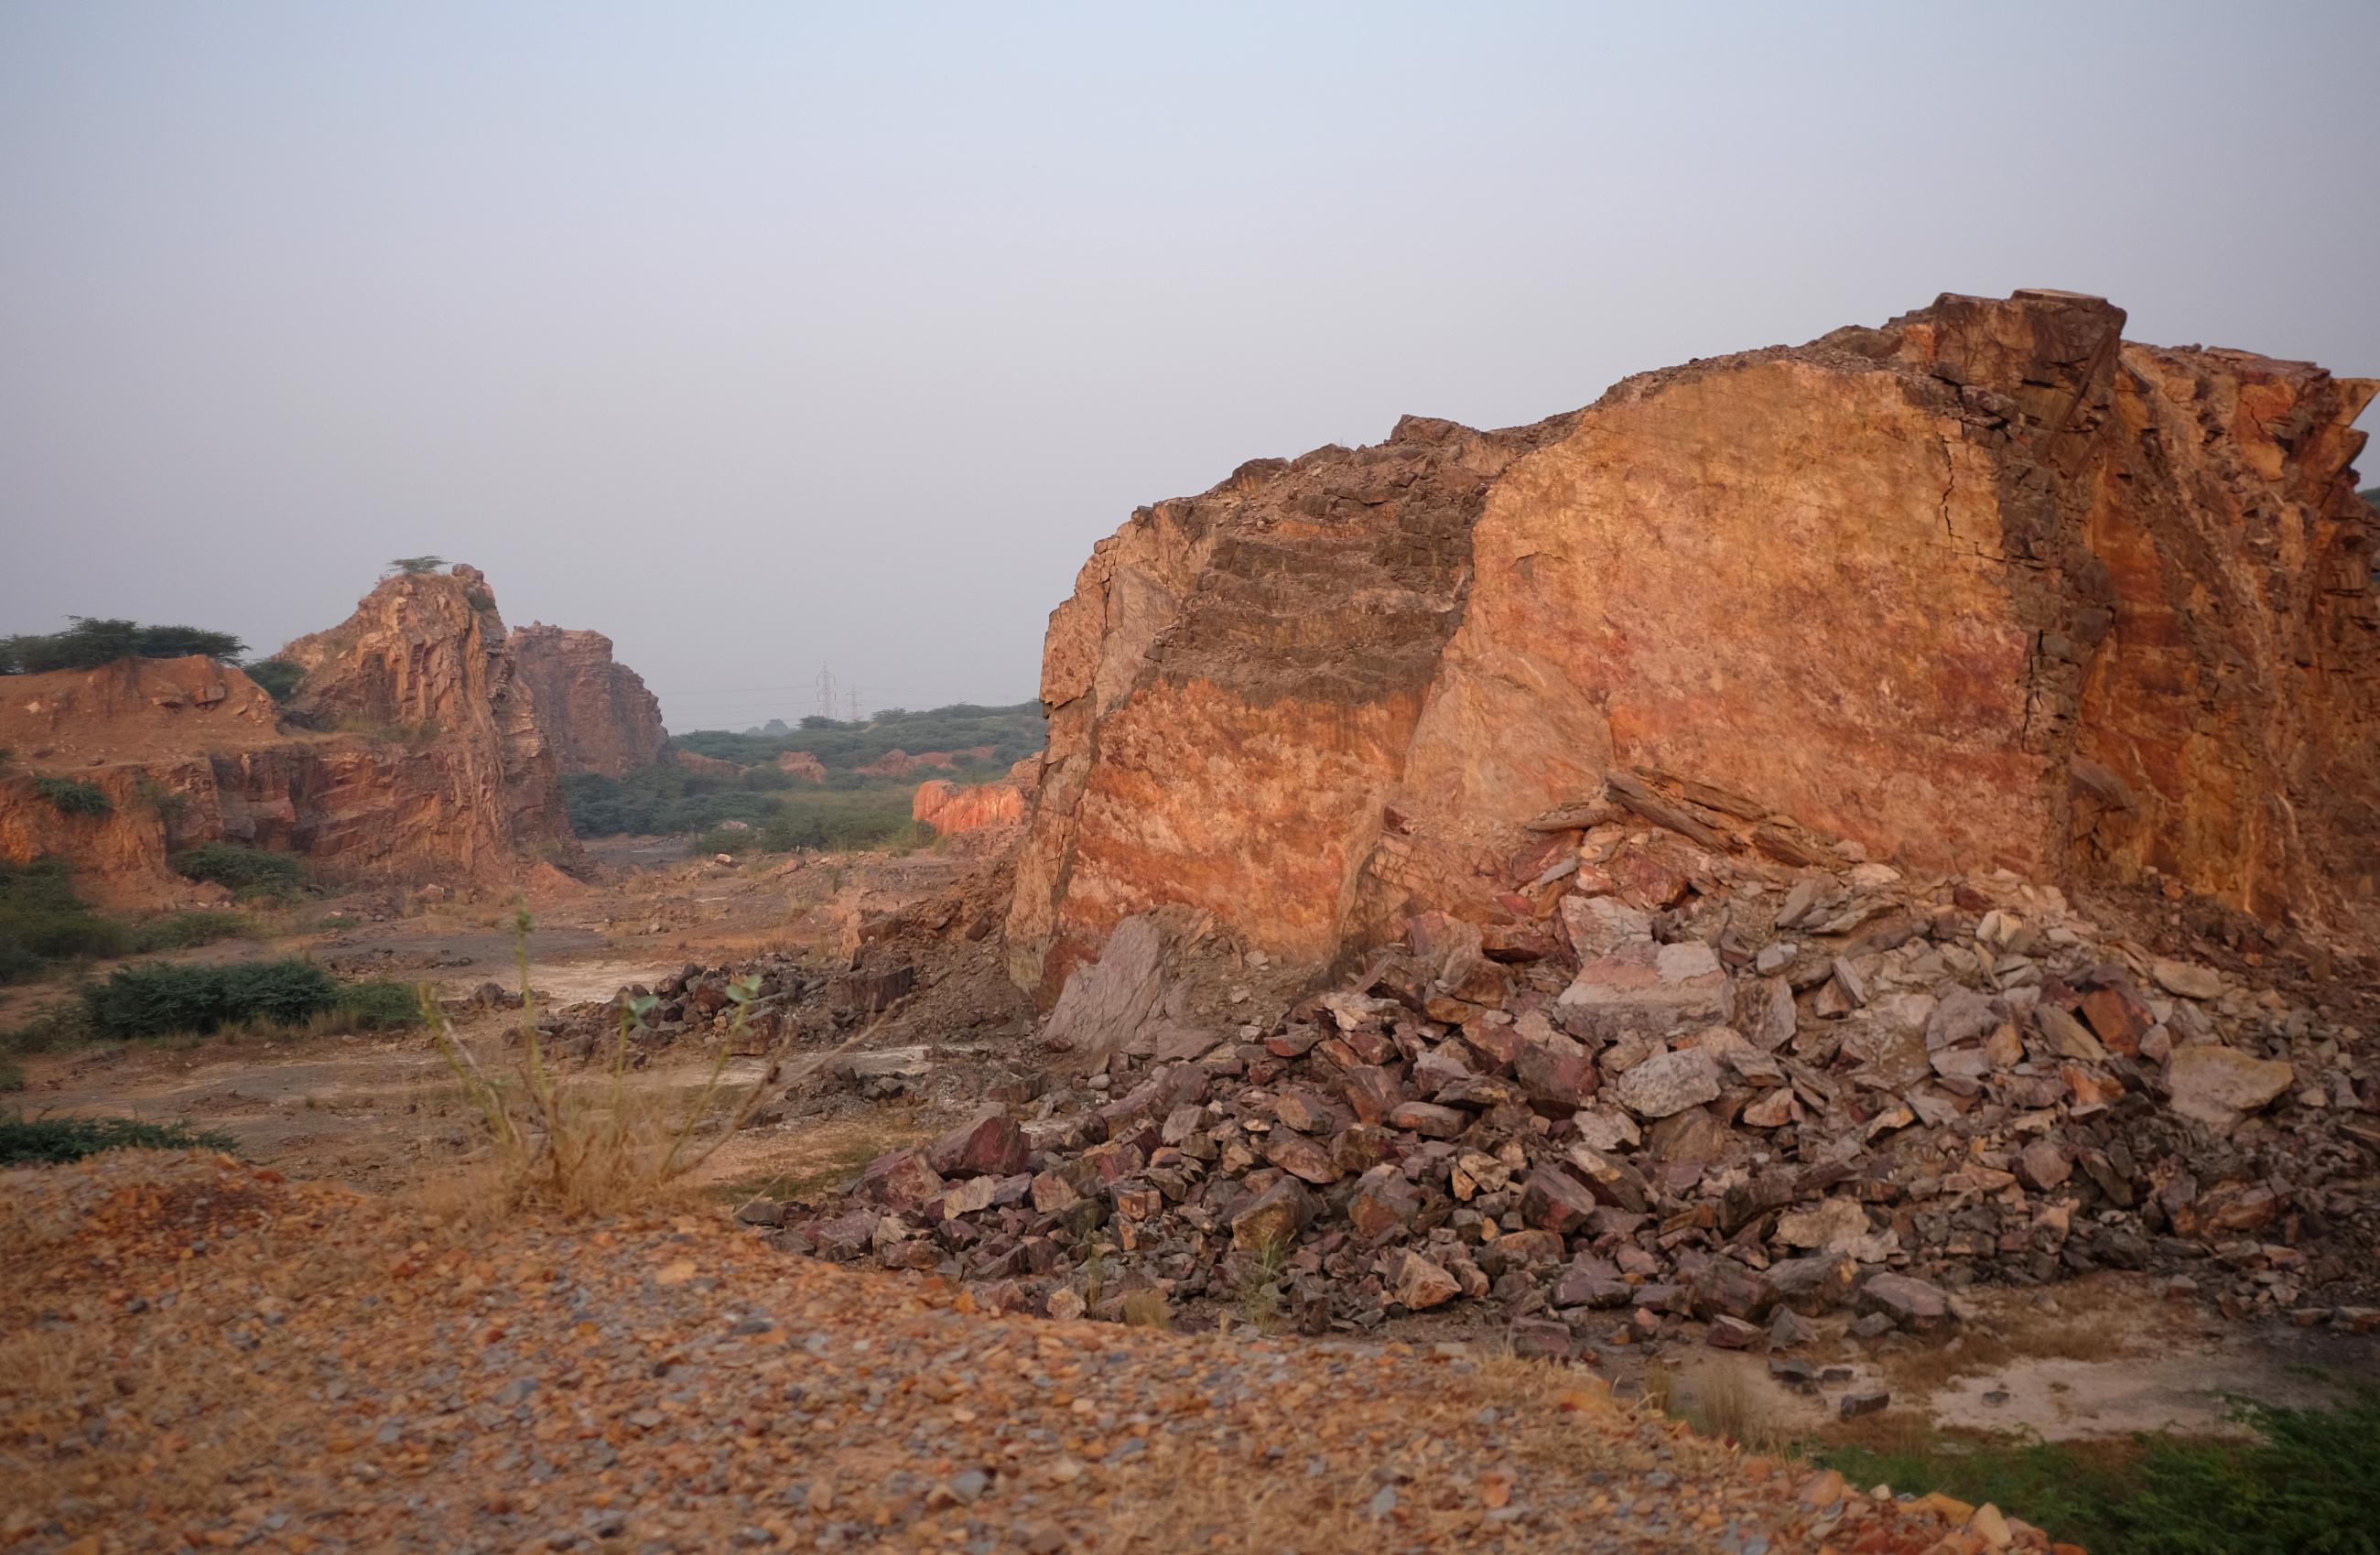 A view of a disused sandstone quarry is pictured near the village of Sirohi in the northern state of Haryana, India, October 29, 2018. 